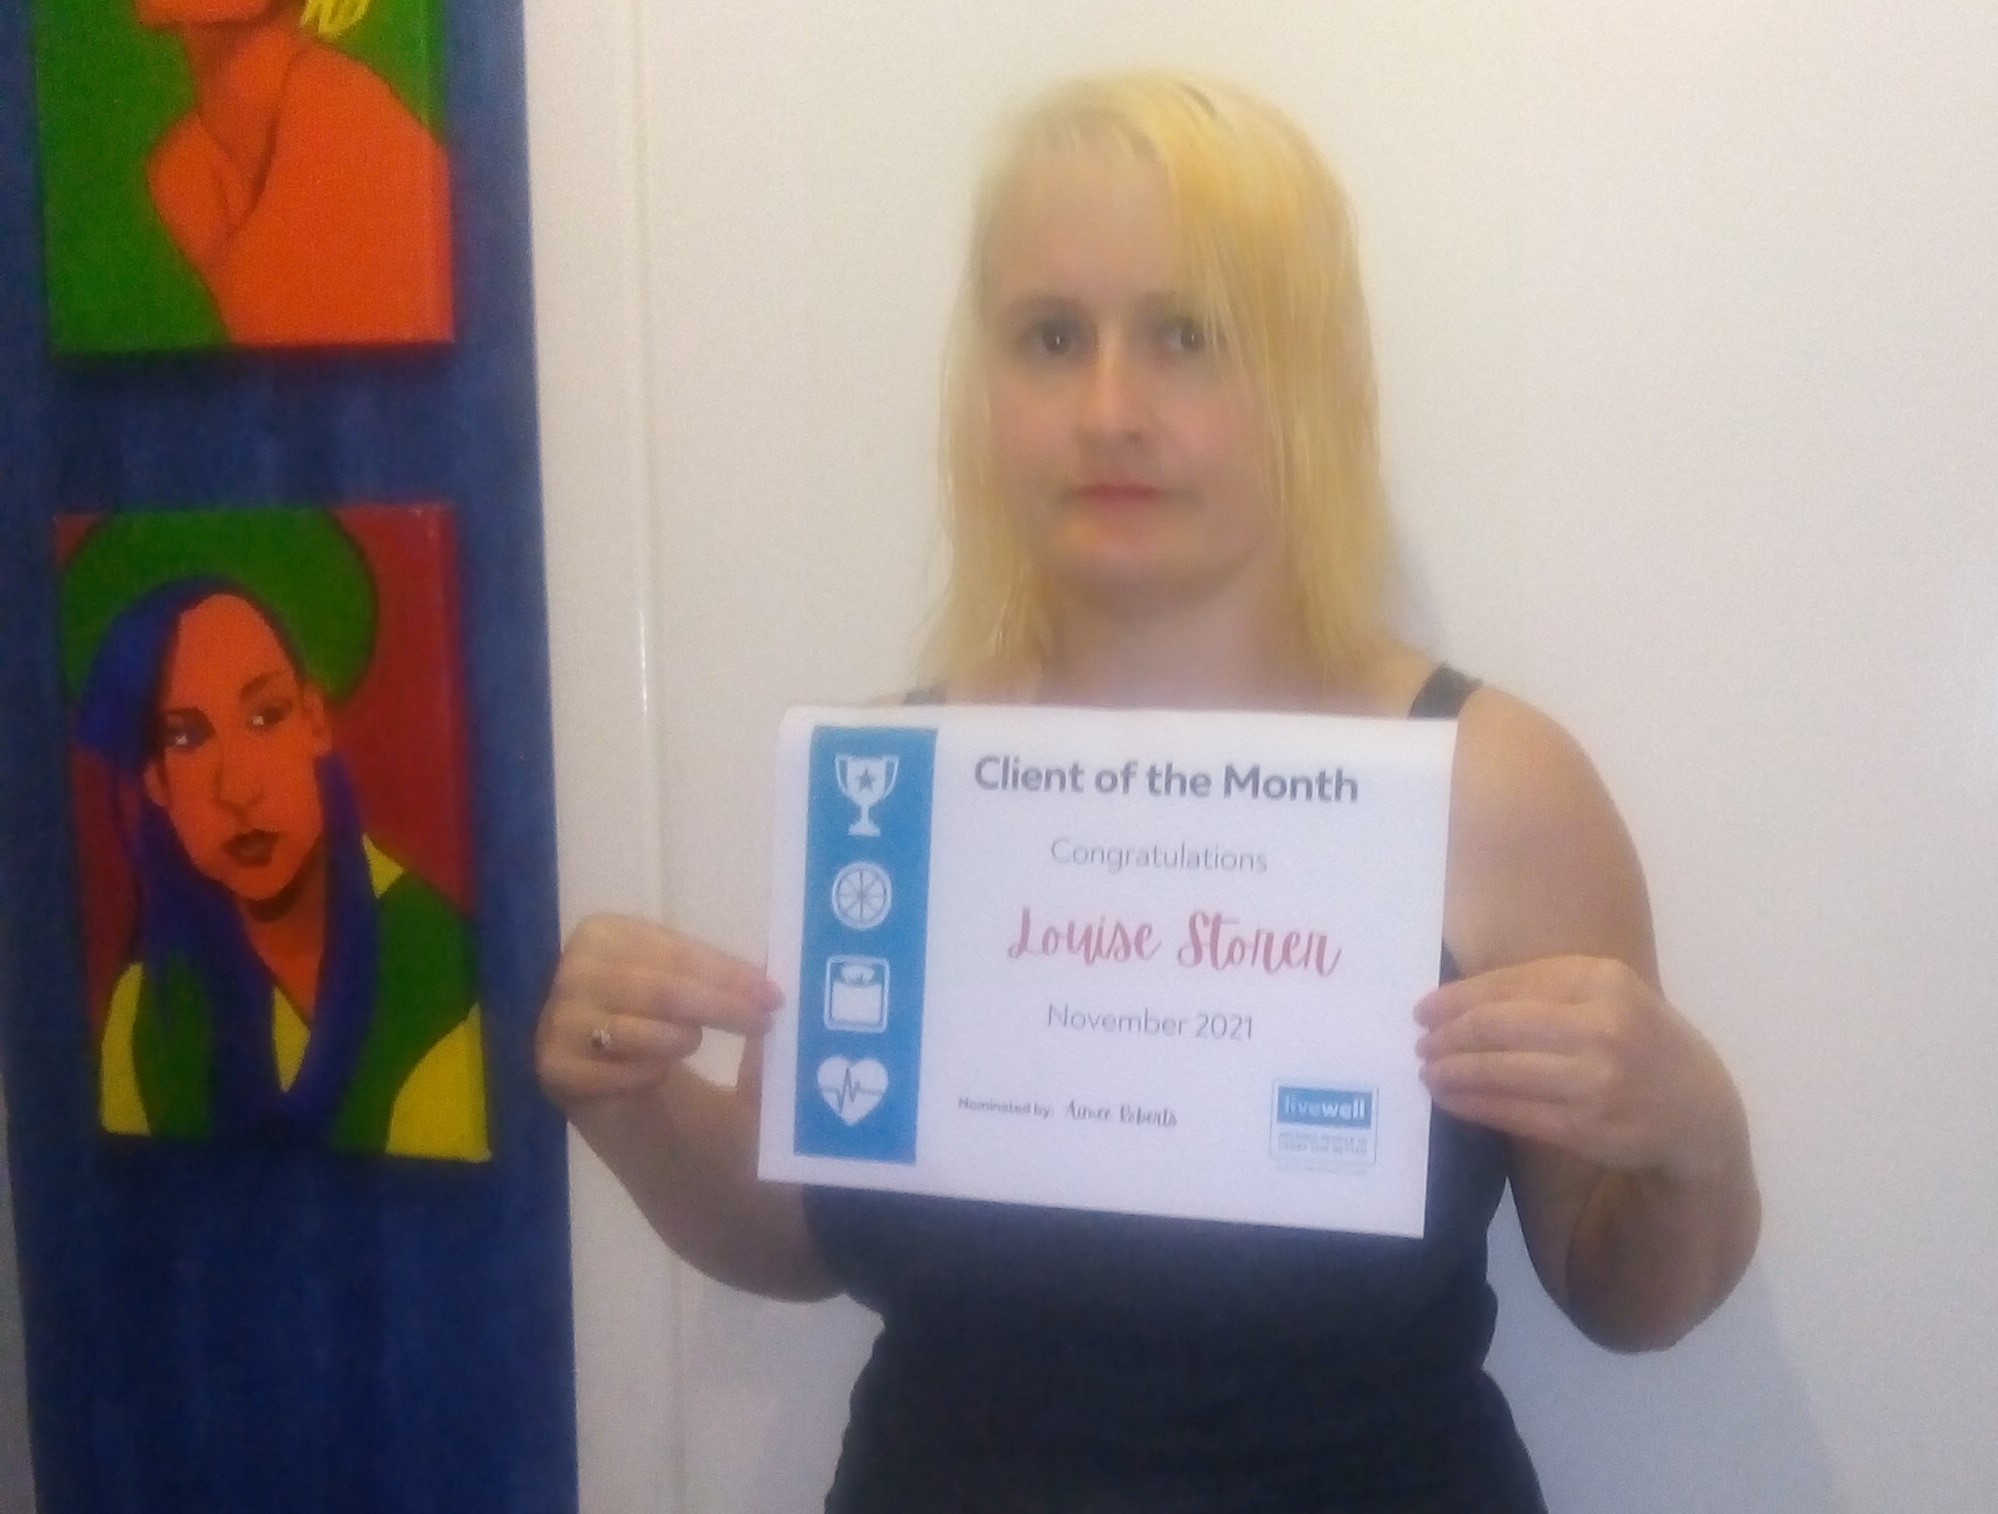 Louise Storer, Livewell client of the month Nov 21